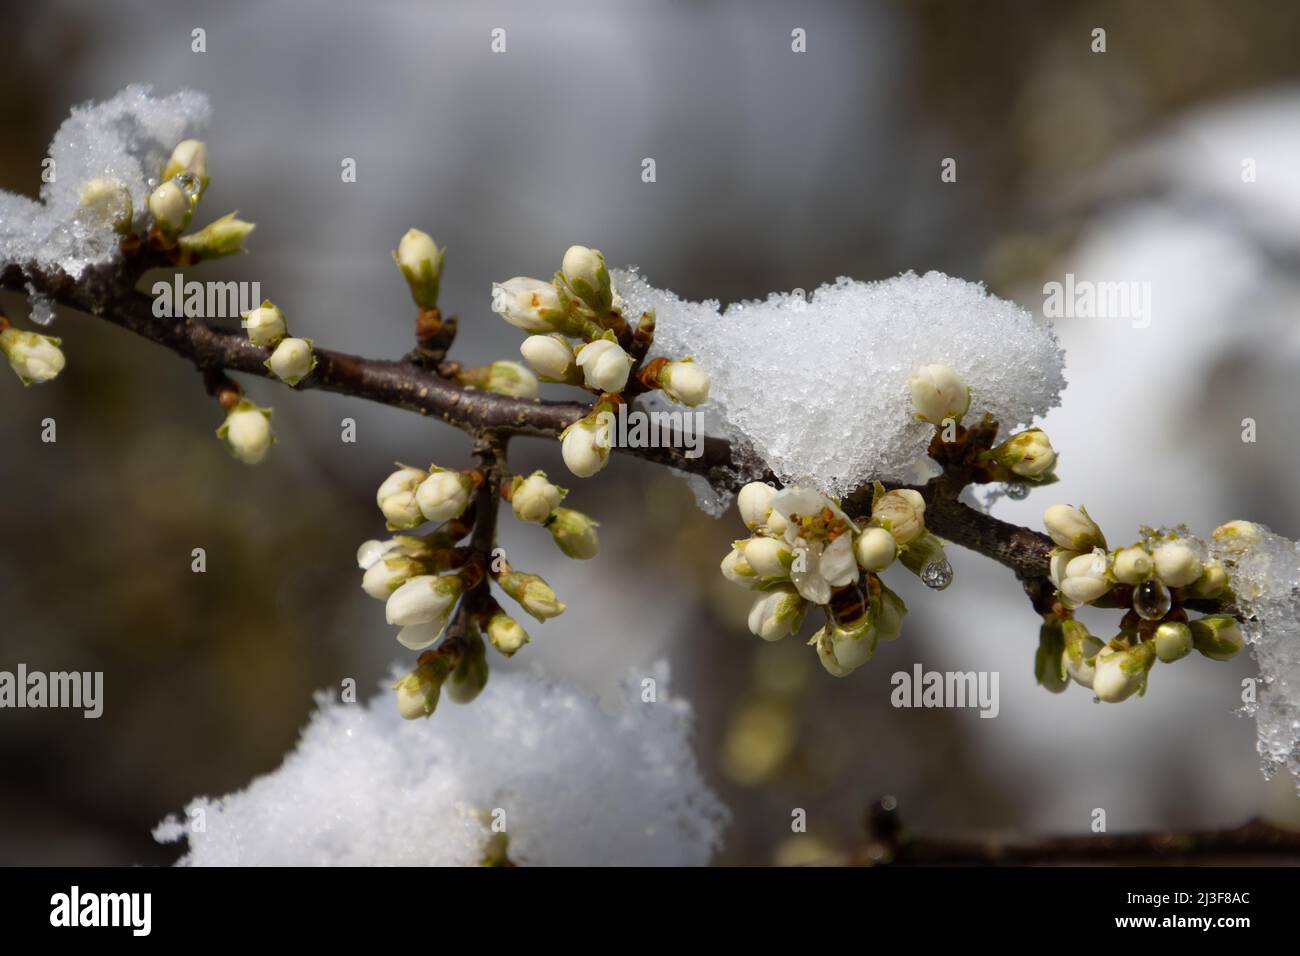 Flower buds of a blackthorn bush covered with snow and ice Stock Photo